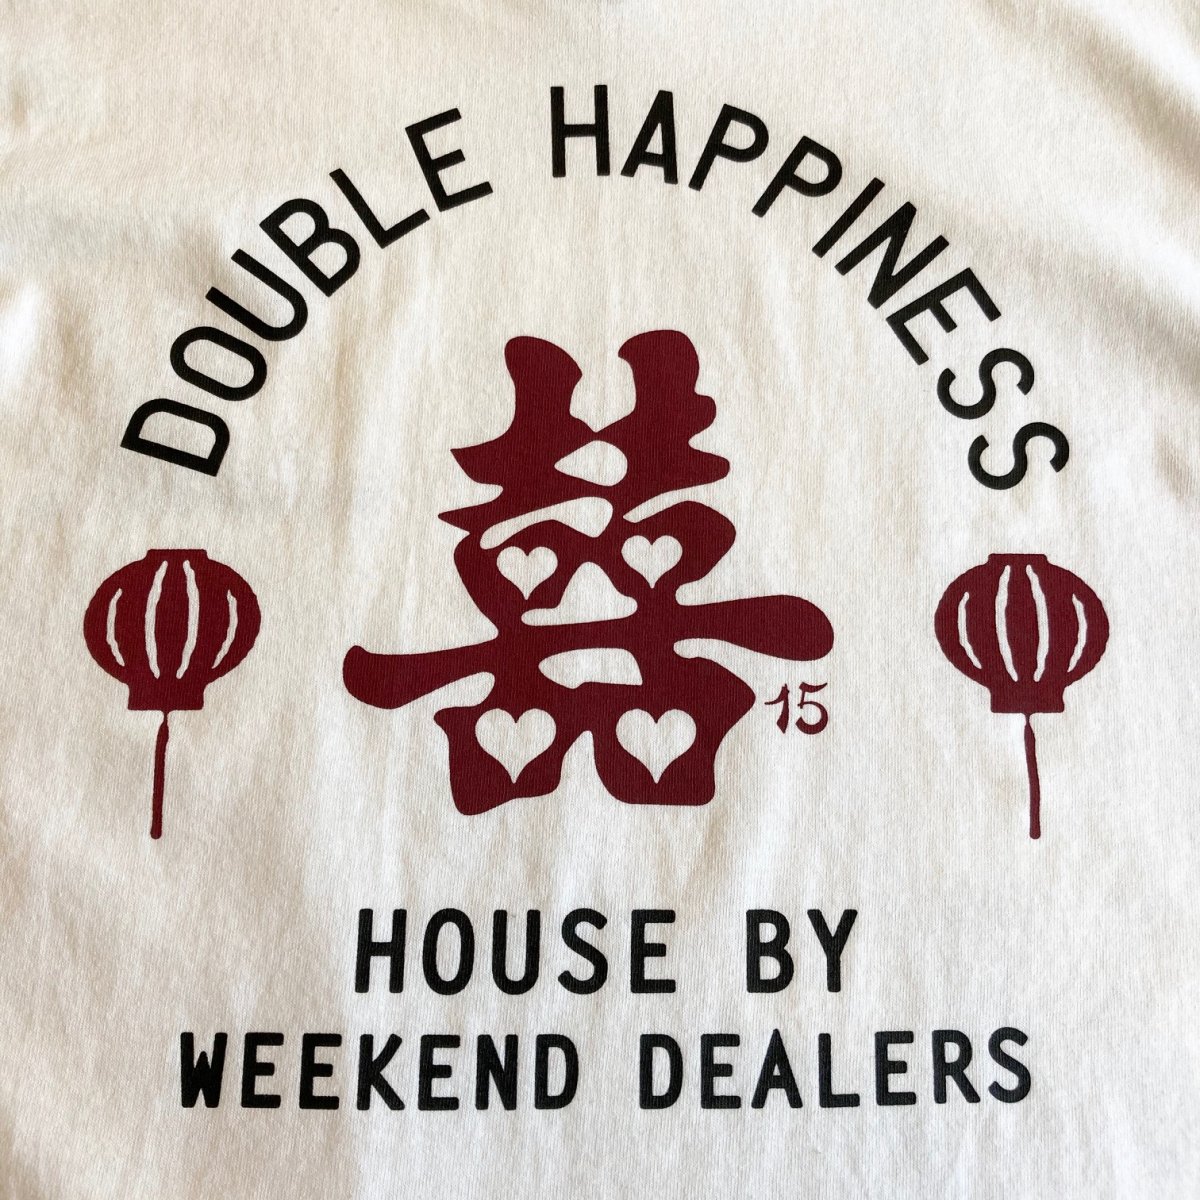 <img class='new_mark_img1' src='https://img.shop-pro.jp/img/new/icons3.gif' style='border:none;display:inline;margin:0px;padding:0px;width:auto;' />Black Weirdos × HOUSE by WEEKEND DEALERS 15th ANNIVERSARY Tee 【WHITE】 